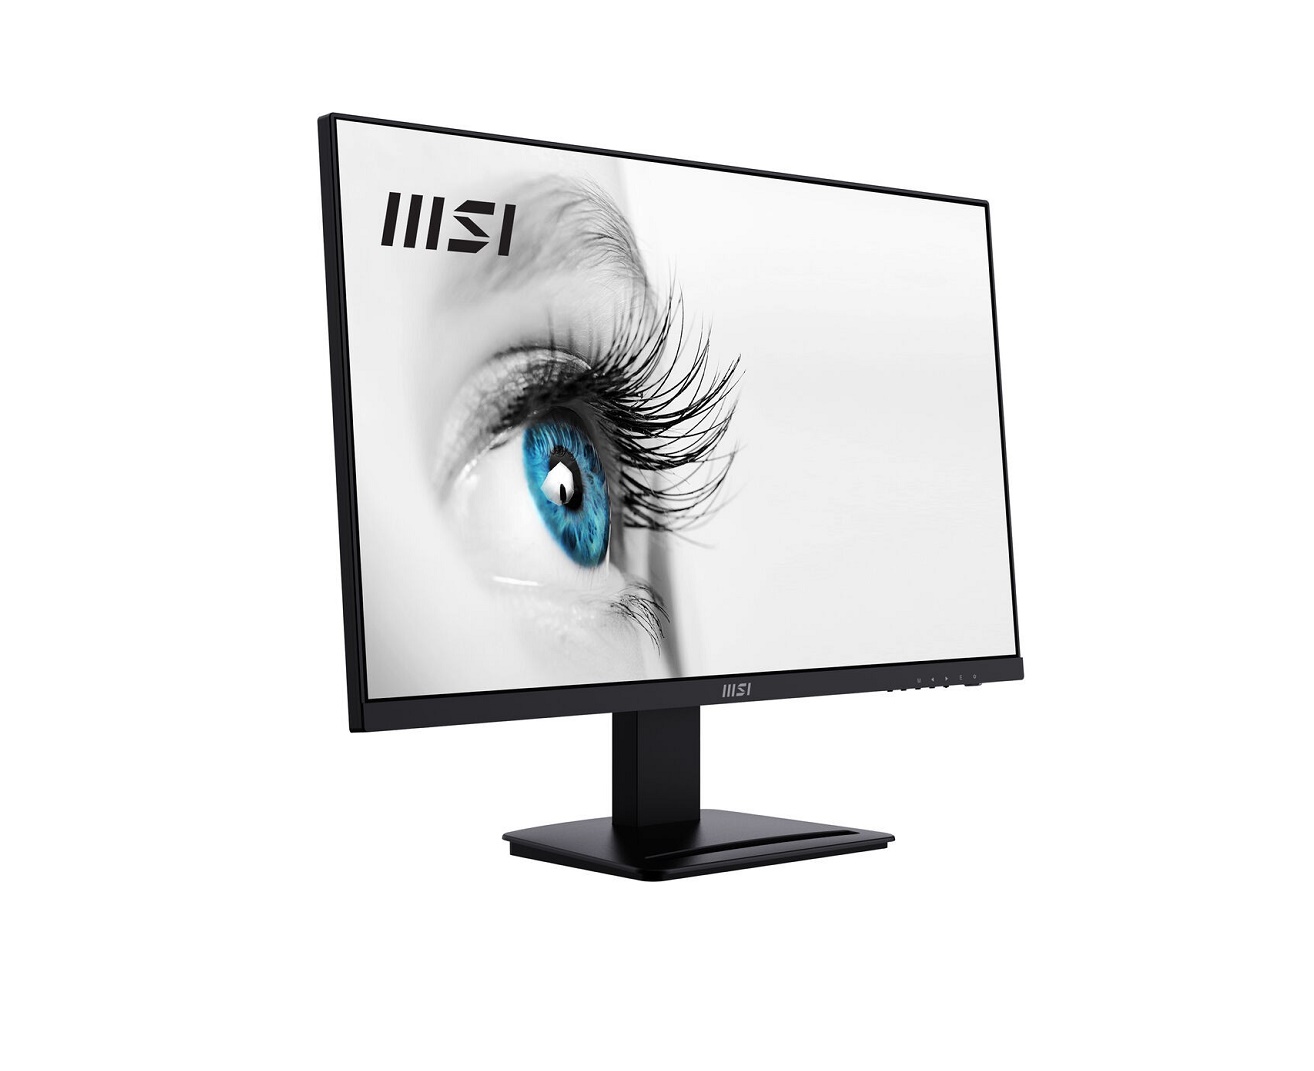 Micro-Star 27 Msi Pro MP273A Fhd 1ms 100Hz Ips Gaming Monitor PROMP273A